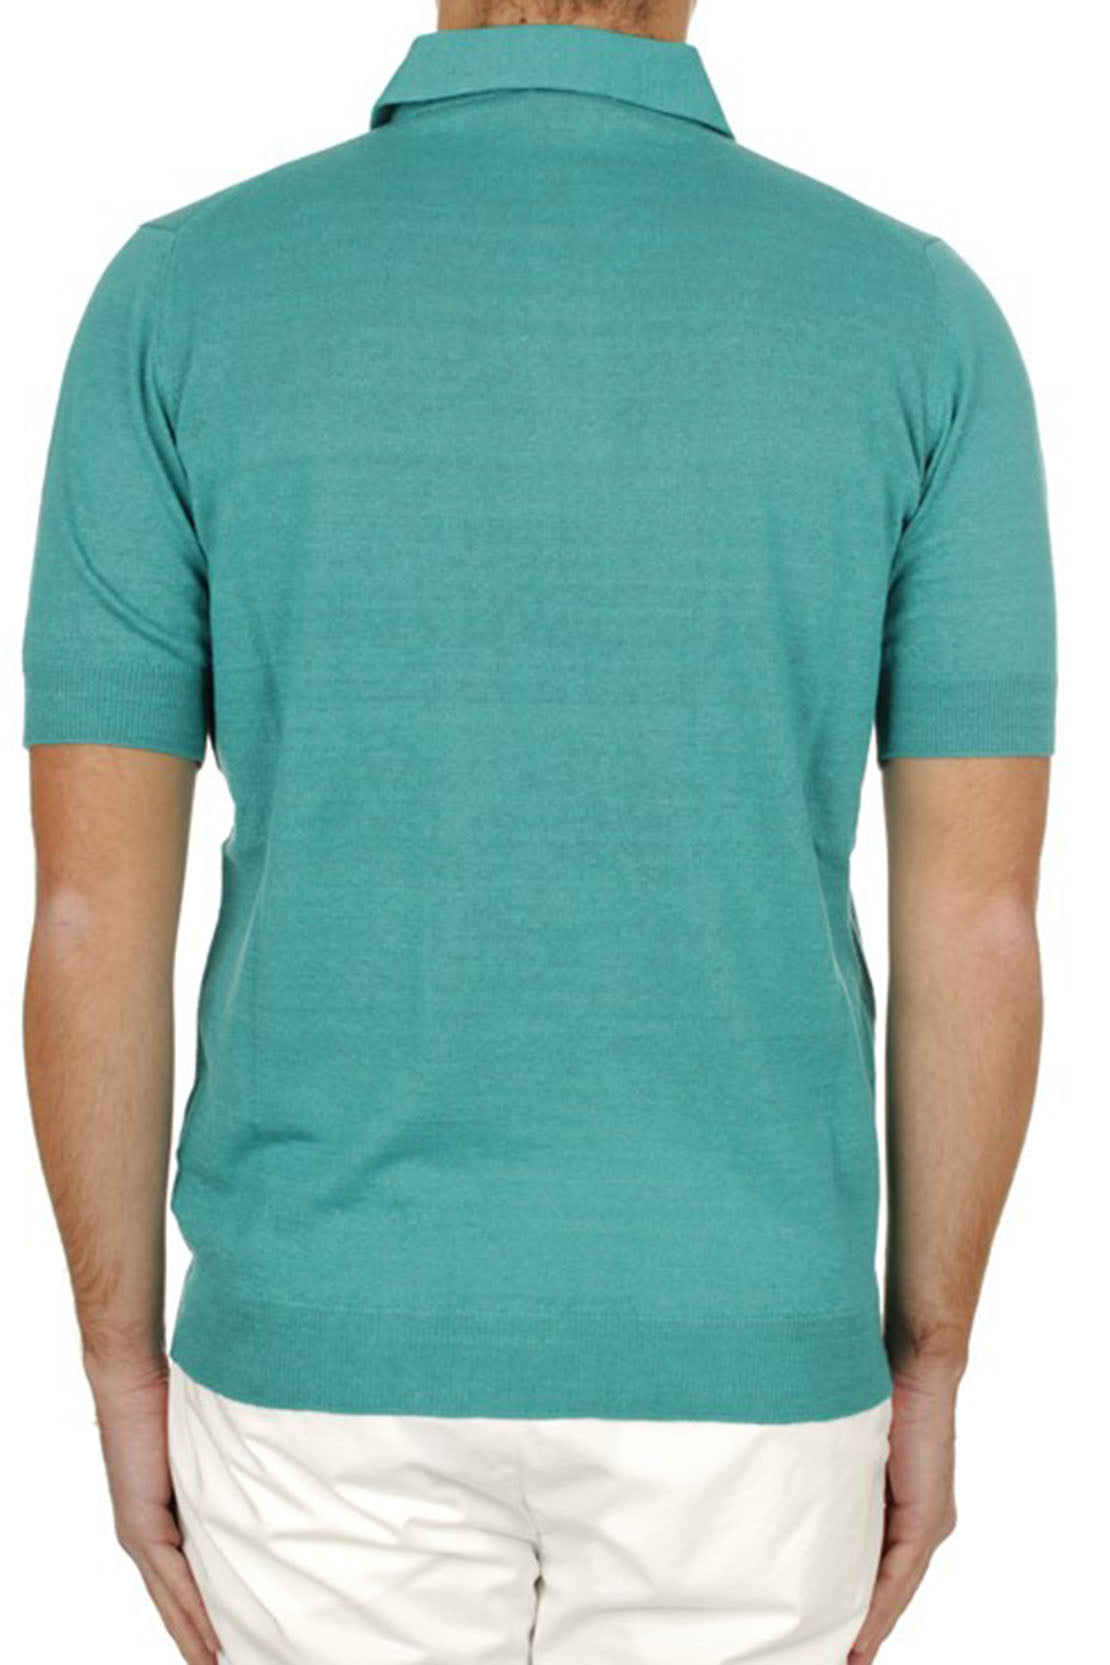 FILIPPO DE LAURENTIIS - Turquoise Knitted Linen and Cotton Blend Polo Shirt